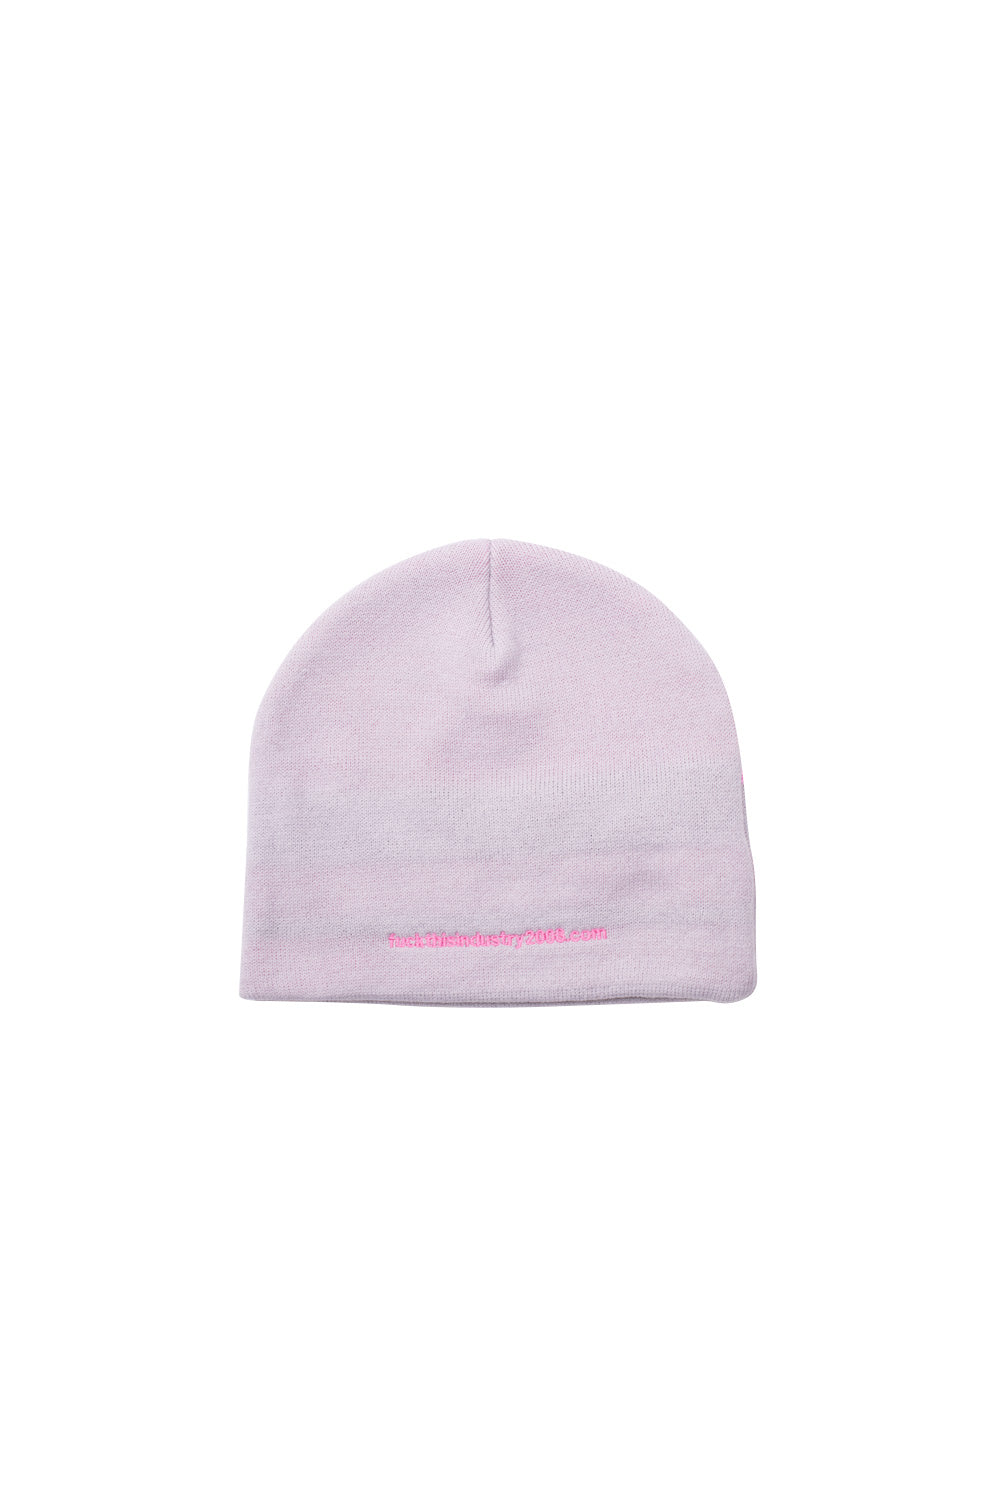 Fuck This Industry Emo Beanie Pink - BONKERS